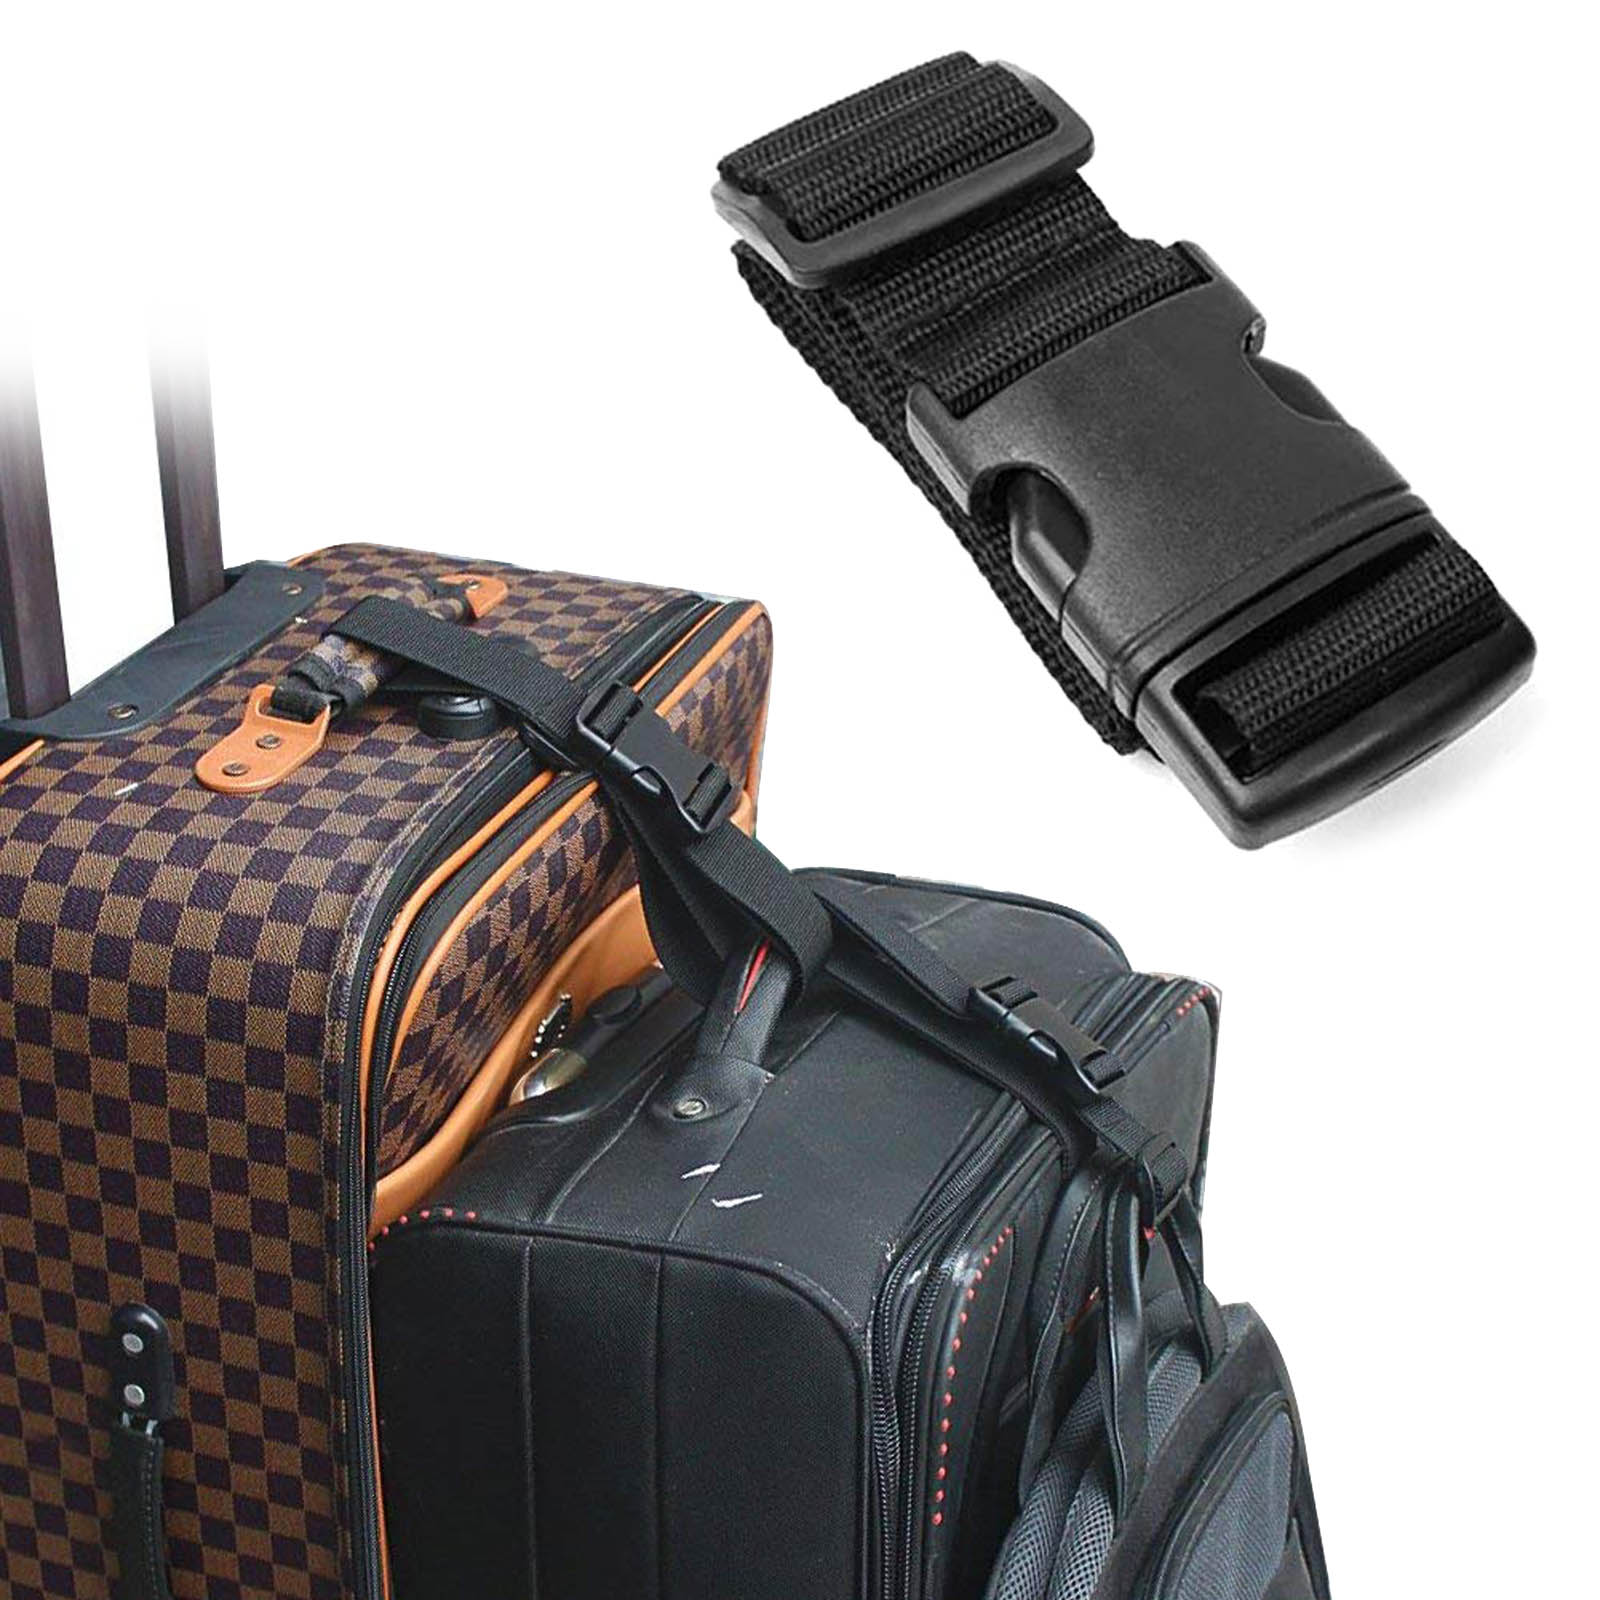 Suitcase Belt Adjustable Luggage Strap Travel Accessories Holiday